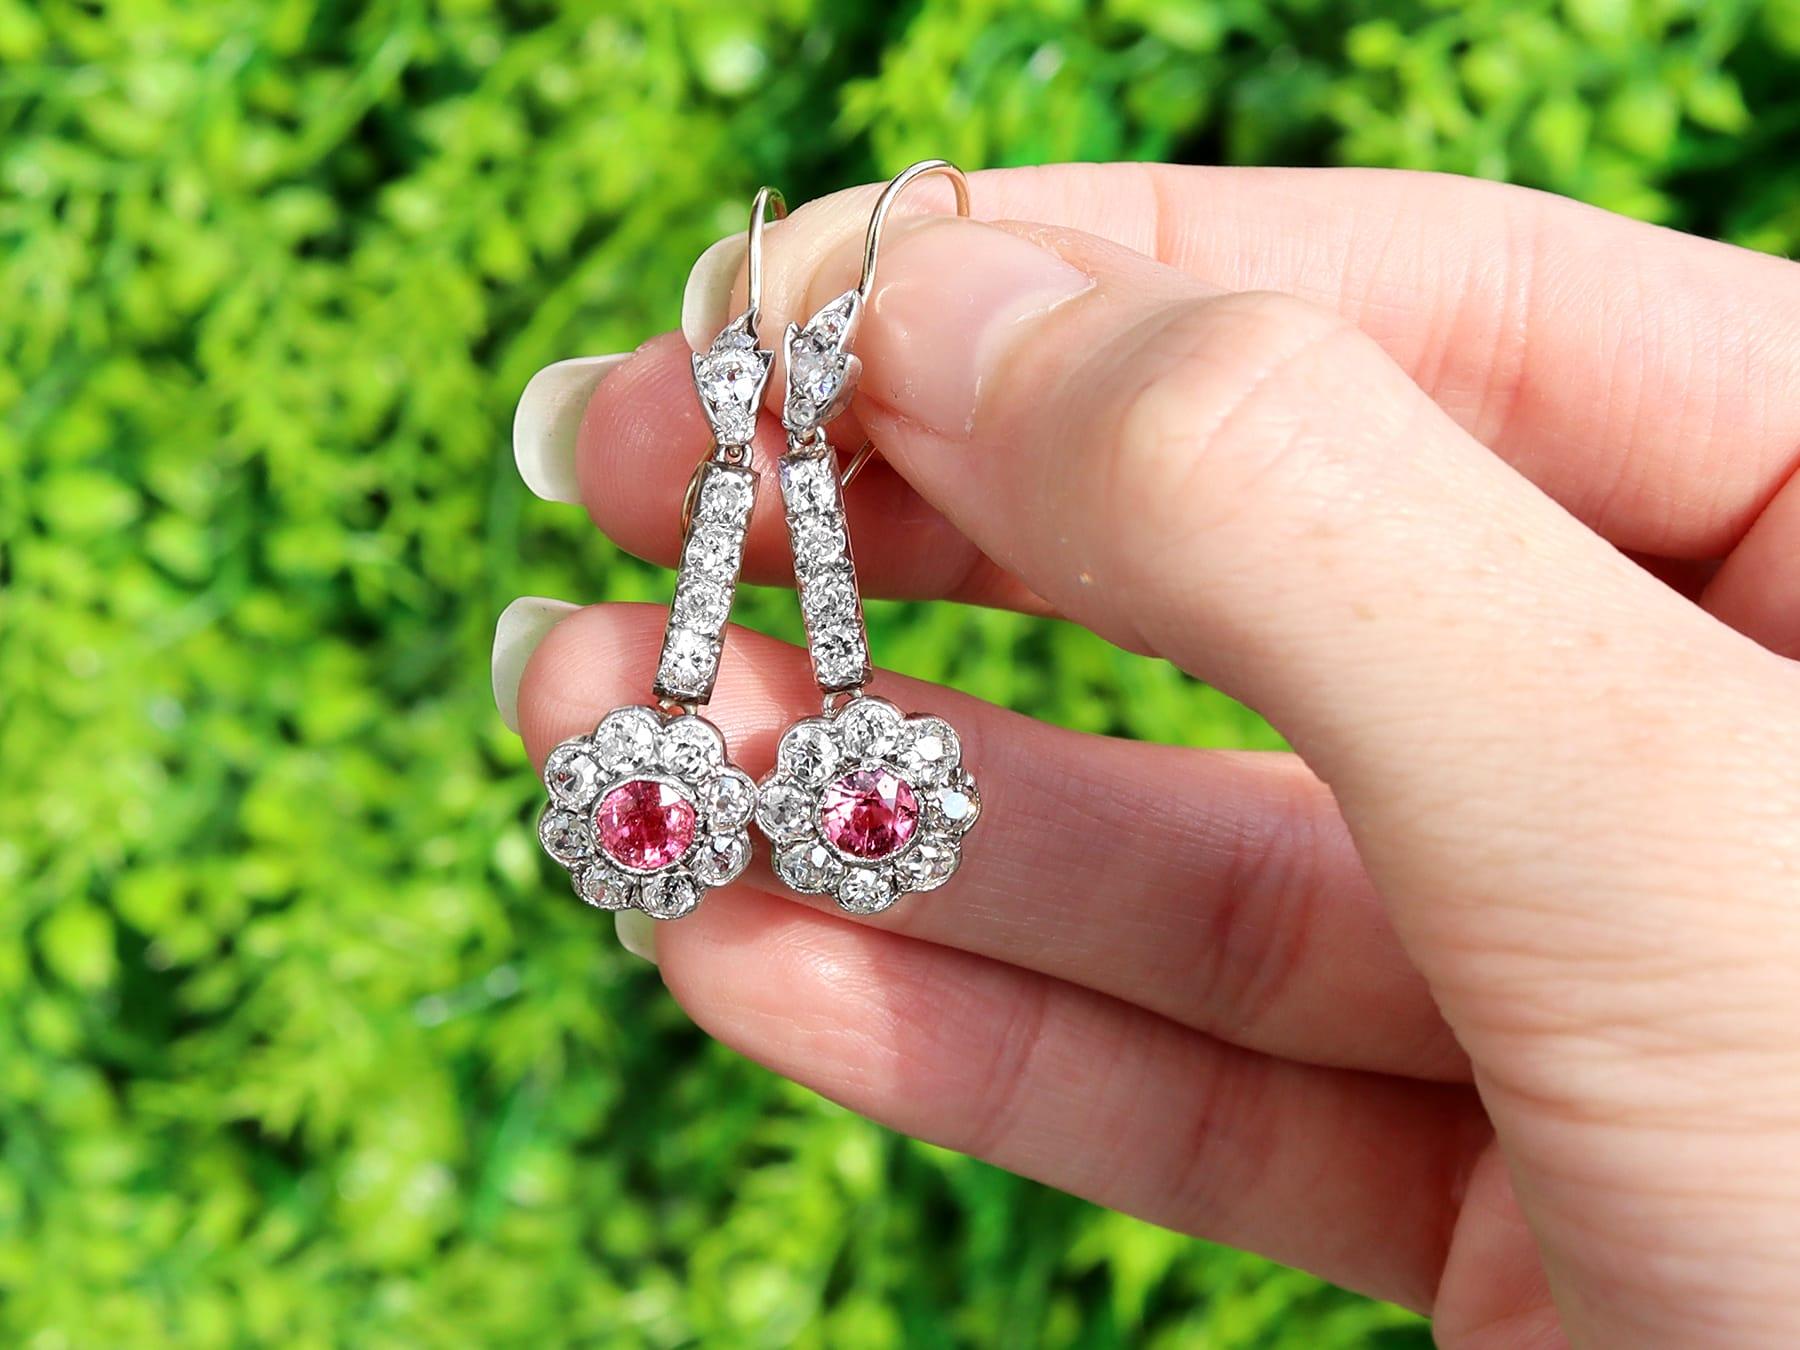 A stunning, fine and impressive pair of antique 1.05 carat natural pink sapphire and 2.42 carat diamond, 12 karat yellow gold, silver set drop earrings; part of our antique jewelry and estate jewelry collections.

These stunning, fine and impressive